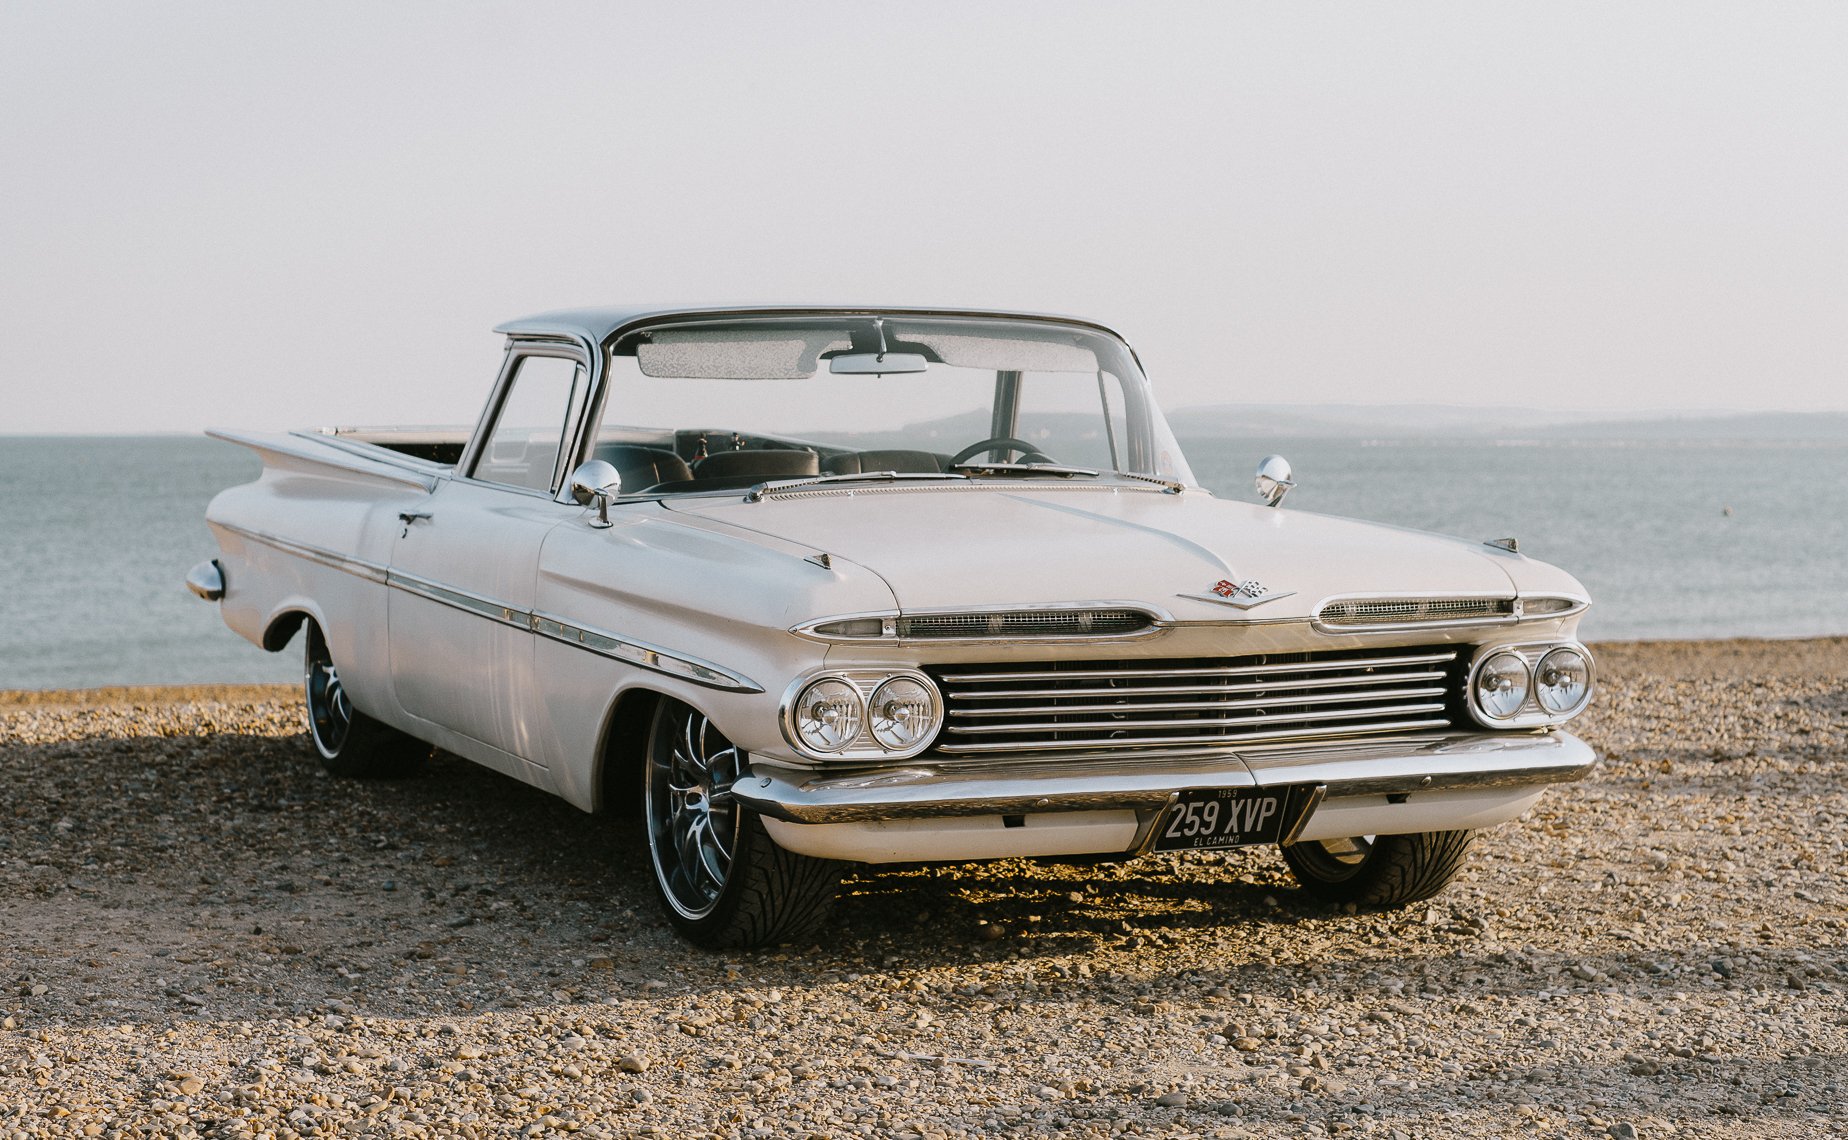 Image of vintage car on the seafront